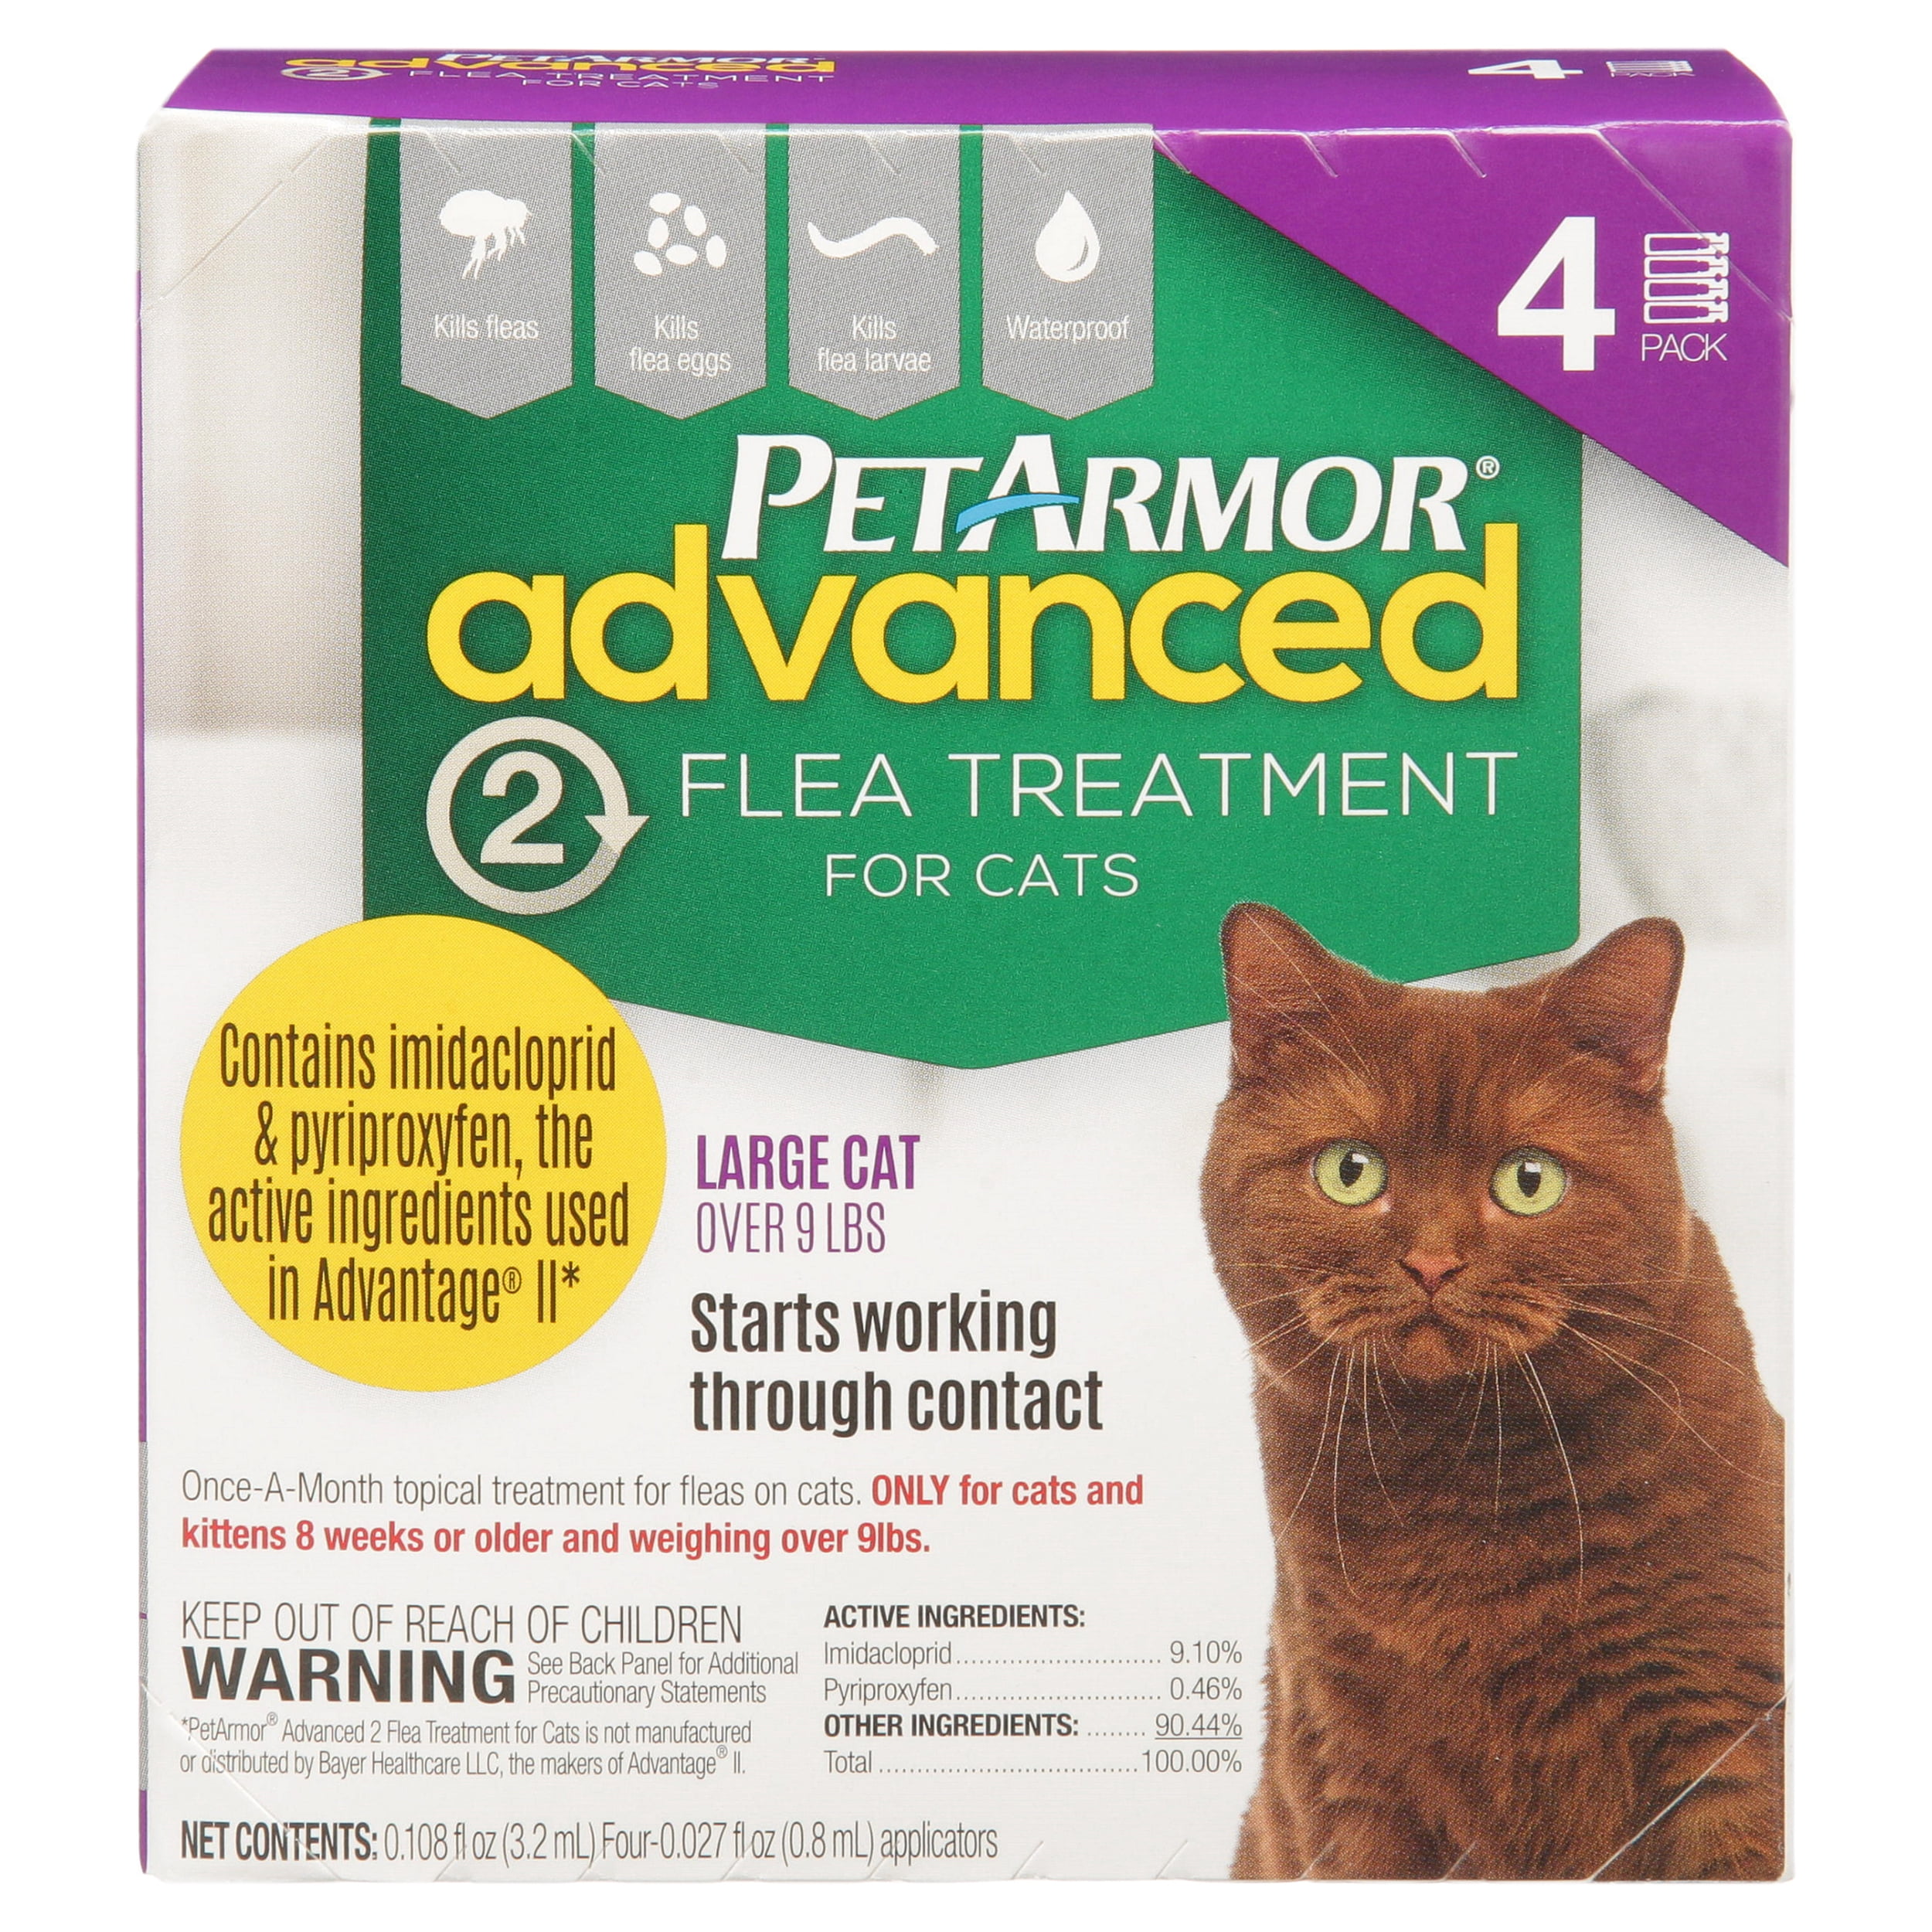 ingredients in advantage 2 for cats